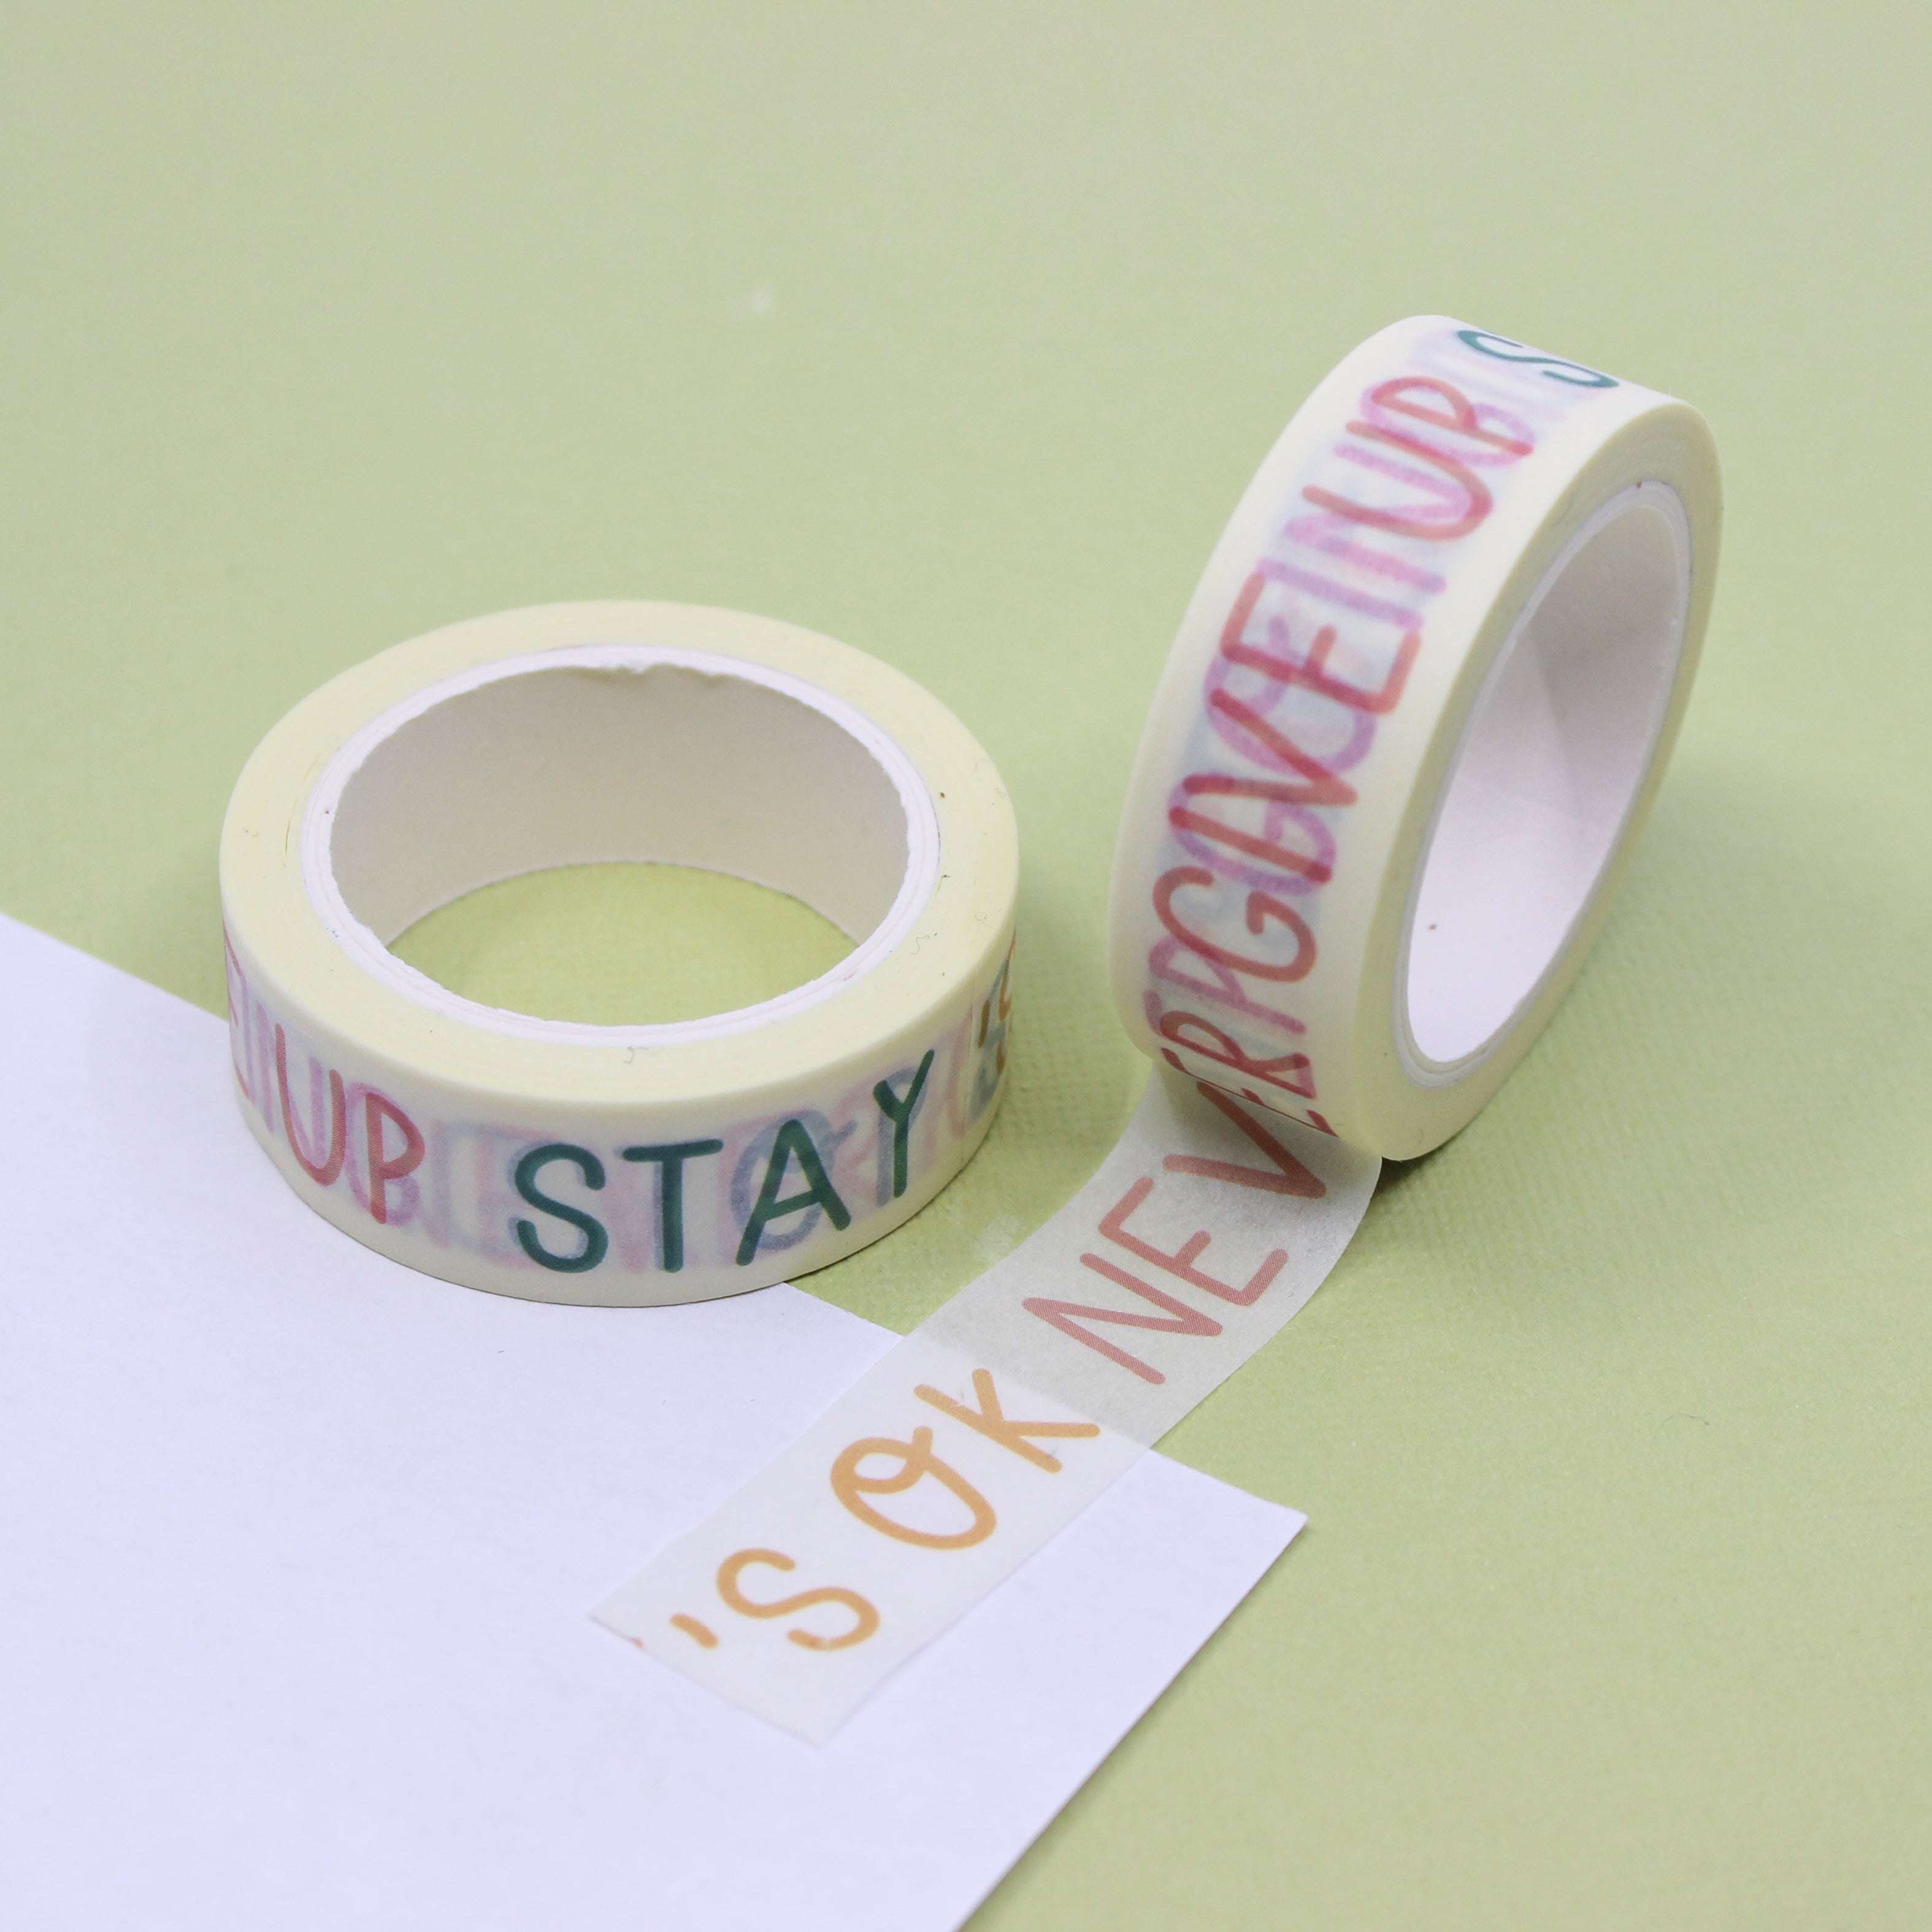 Boost your well-being with our Self-Care Words of Affirmation Washi Tape, featuring uplifting and encouraging phrases. Ideal for adding a positive and motivating touch to your projects. This tape is designed by Sarah Frances and sold at BBB Supplies Craft Shop.